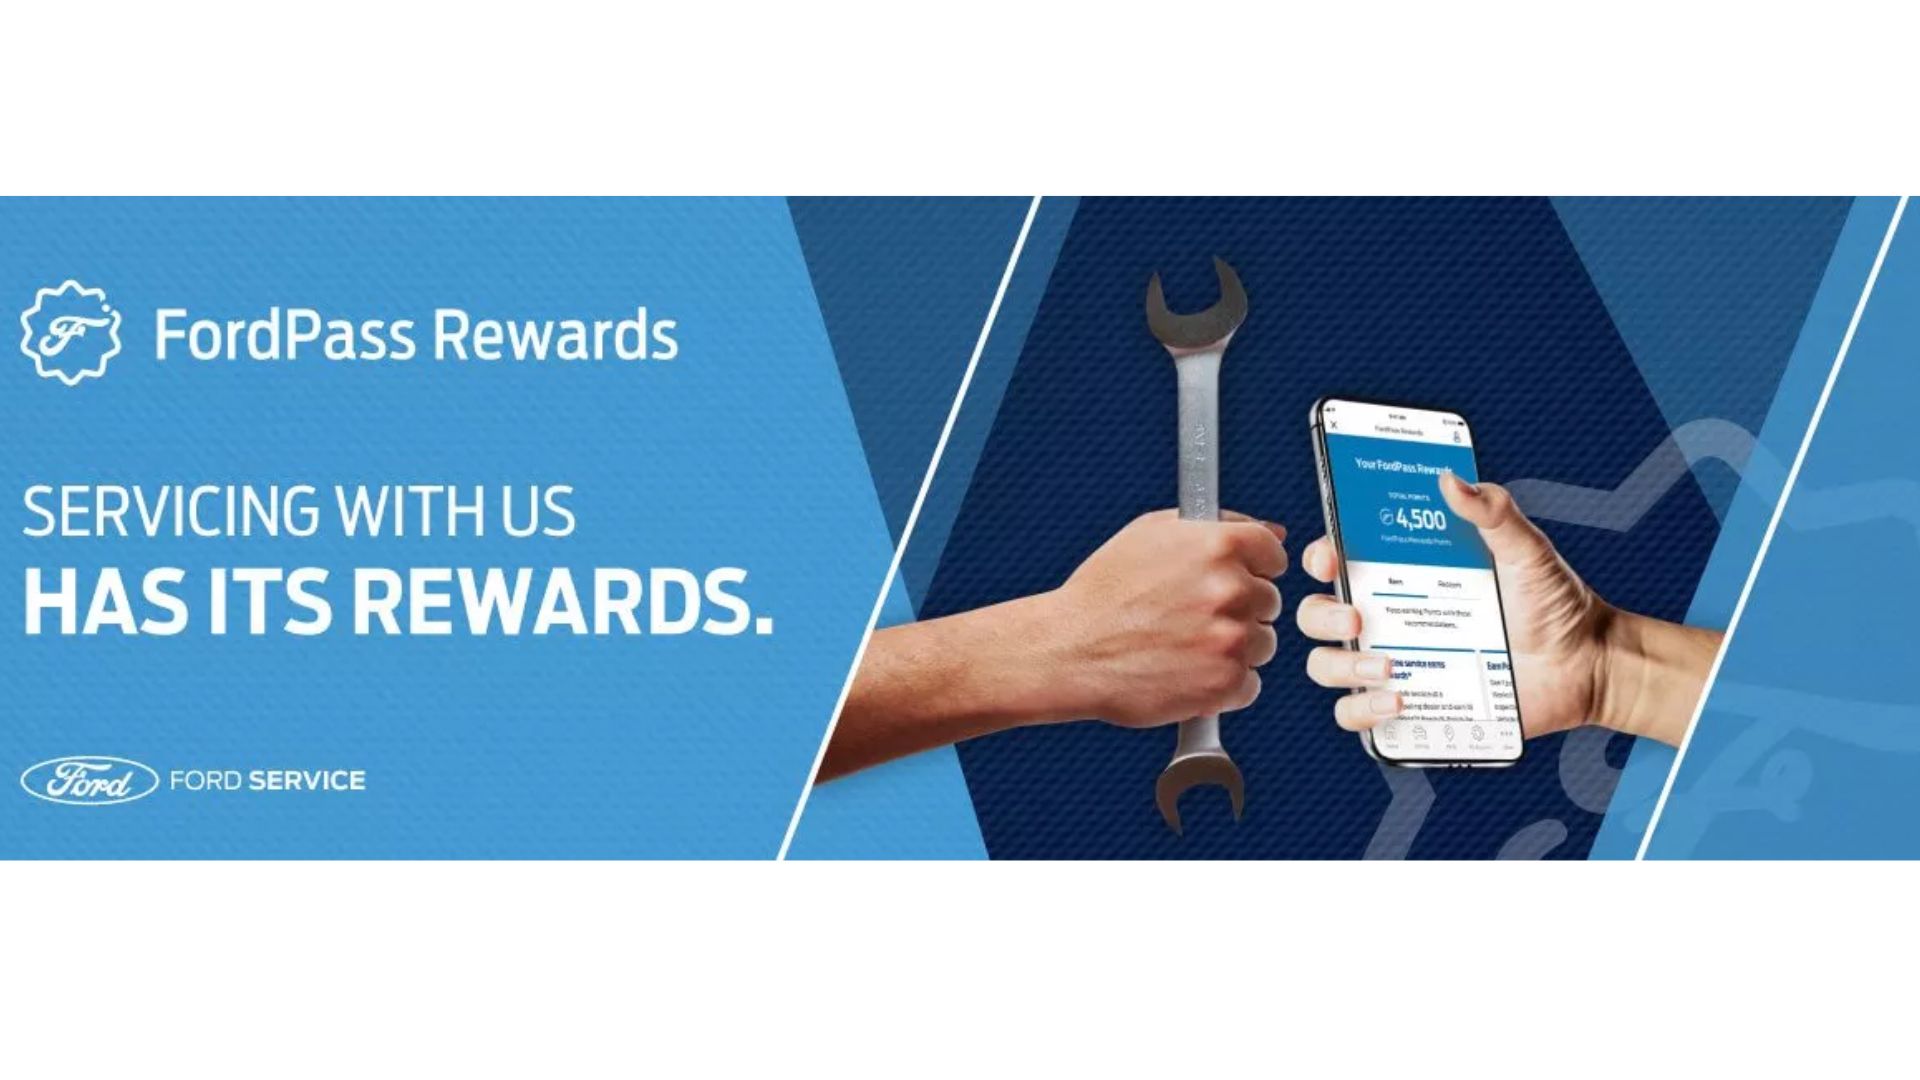 Leveraging the Ford Pass Rewards Program